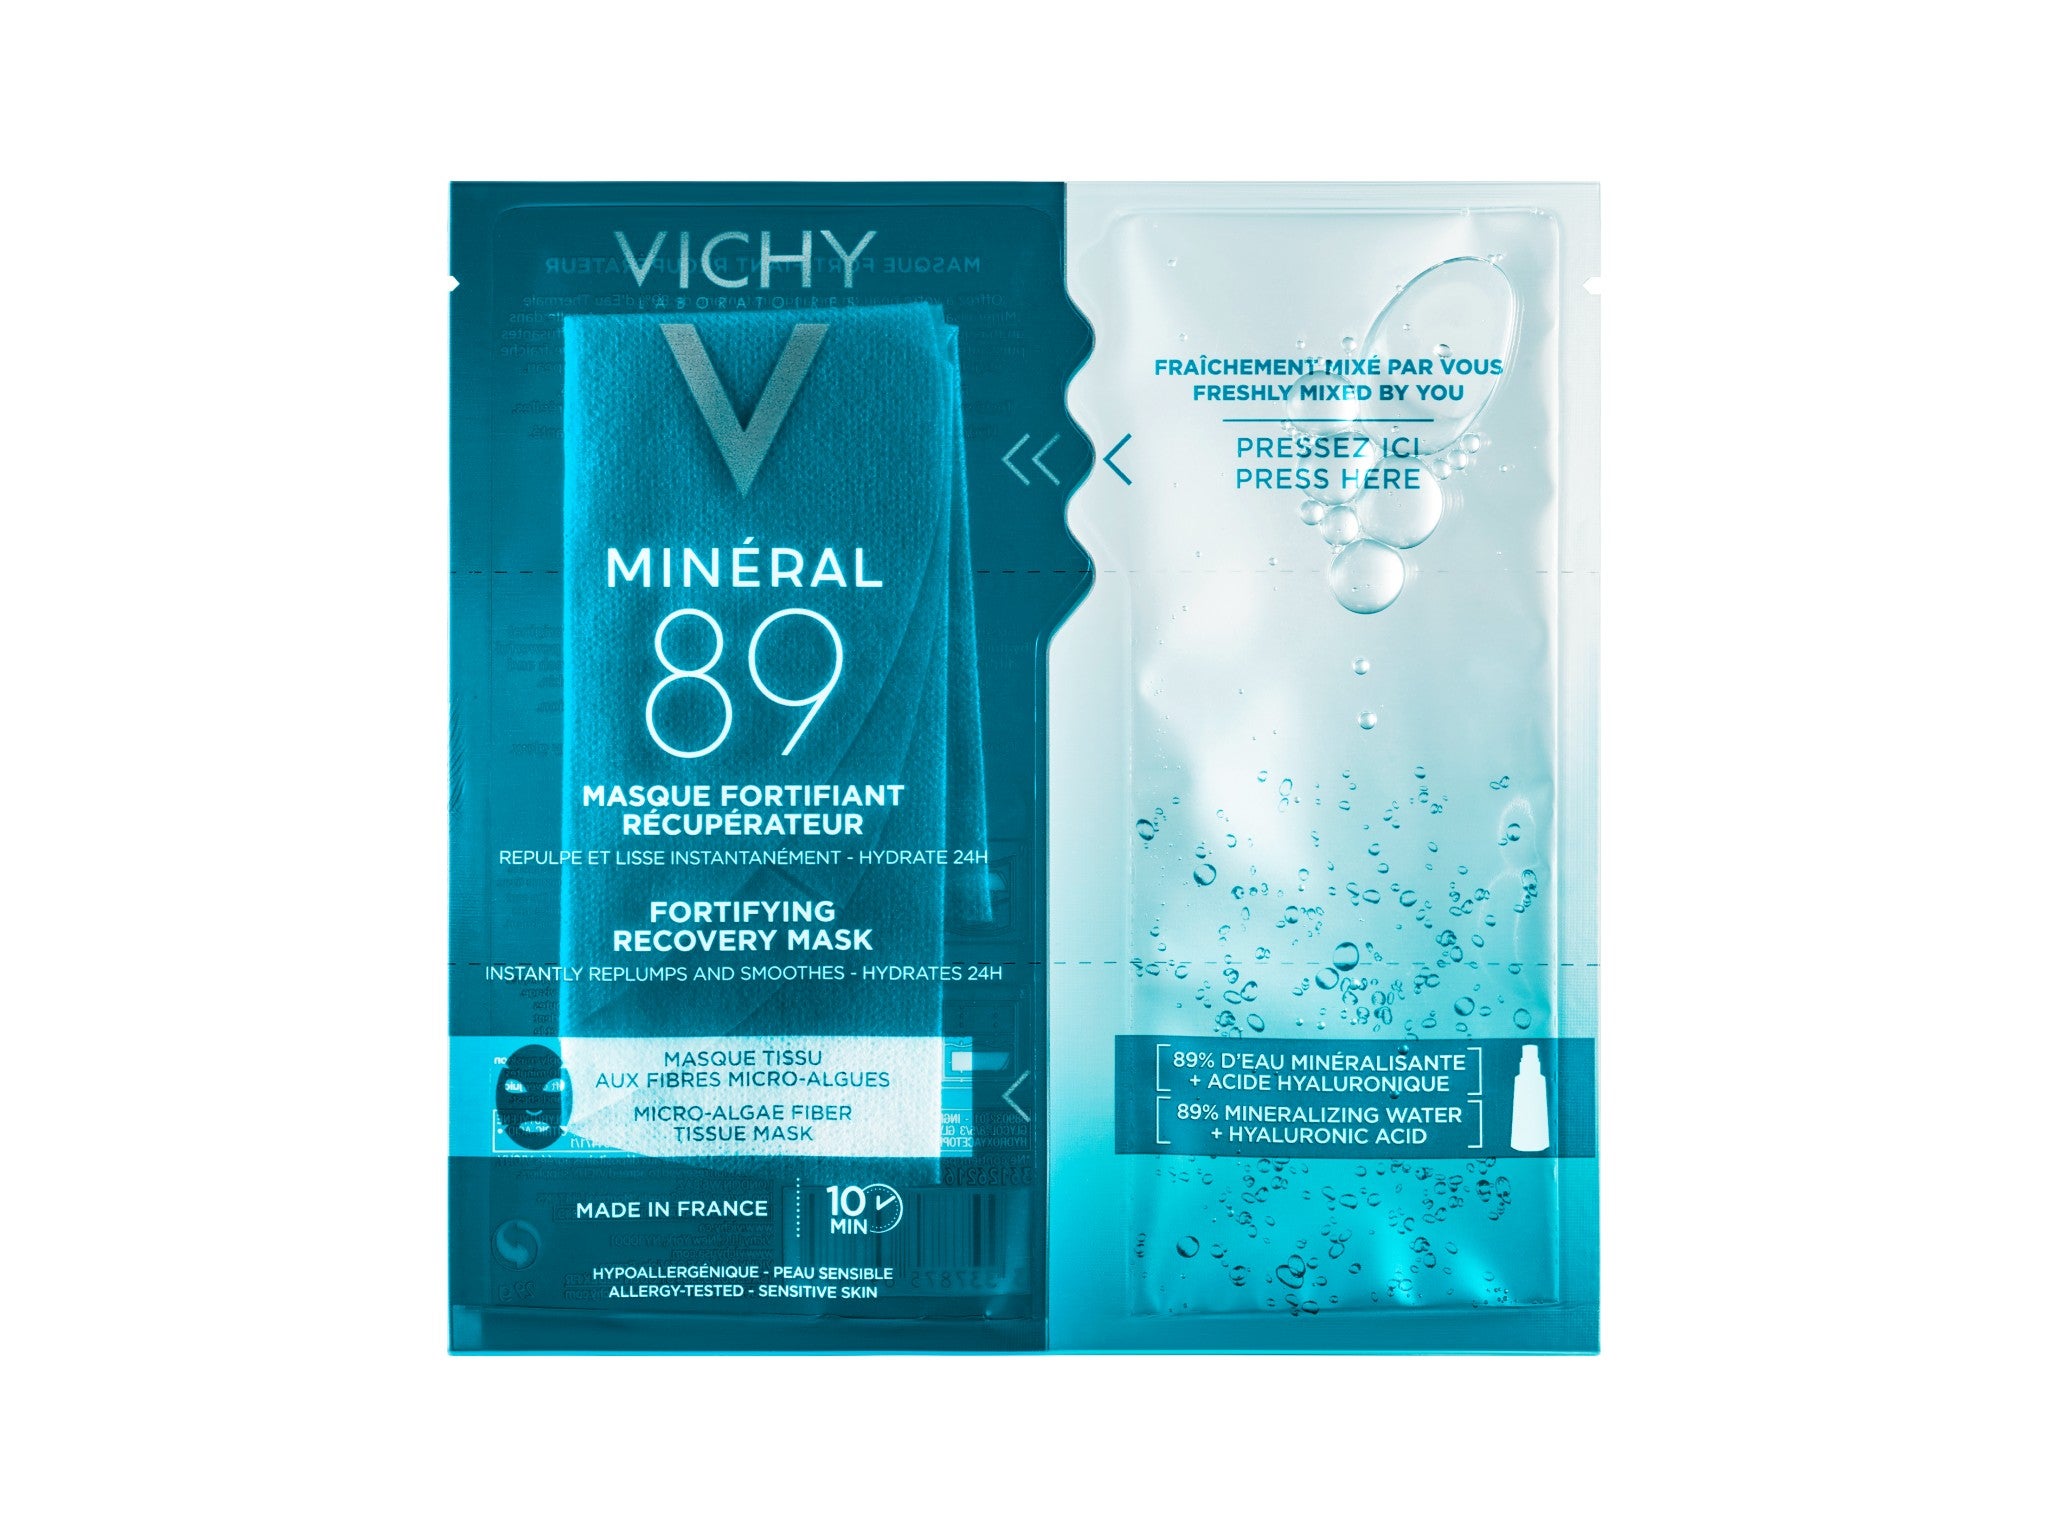 Vichy mineral 89 sheet mask indybest.jpg